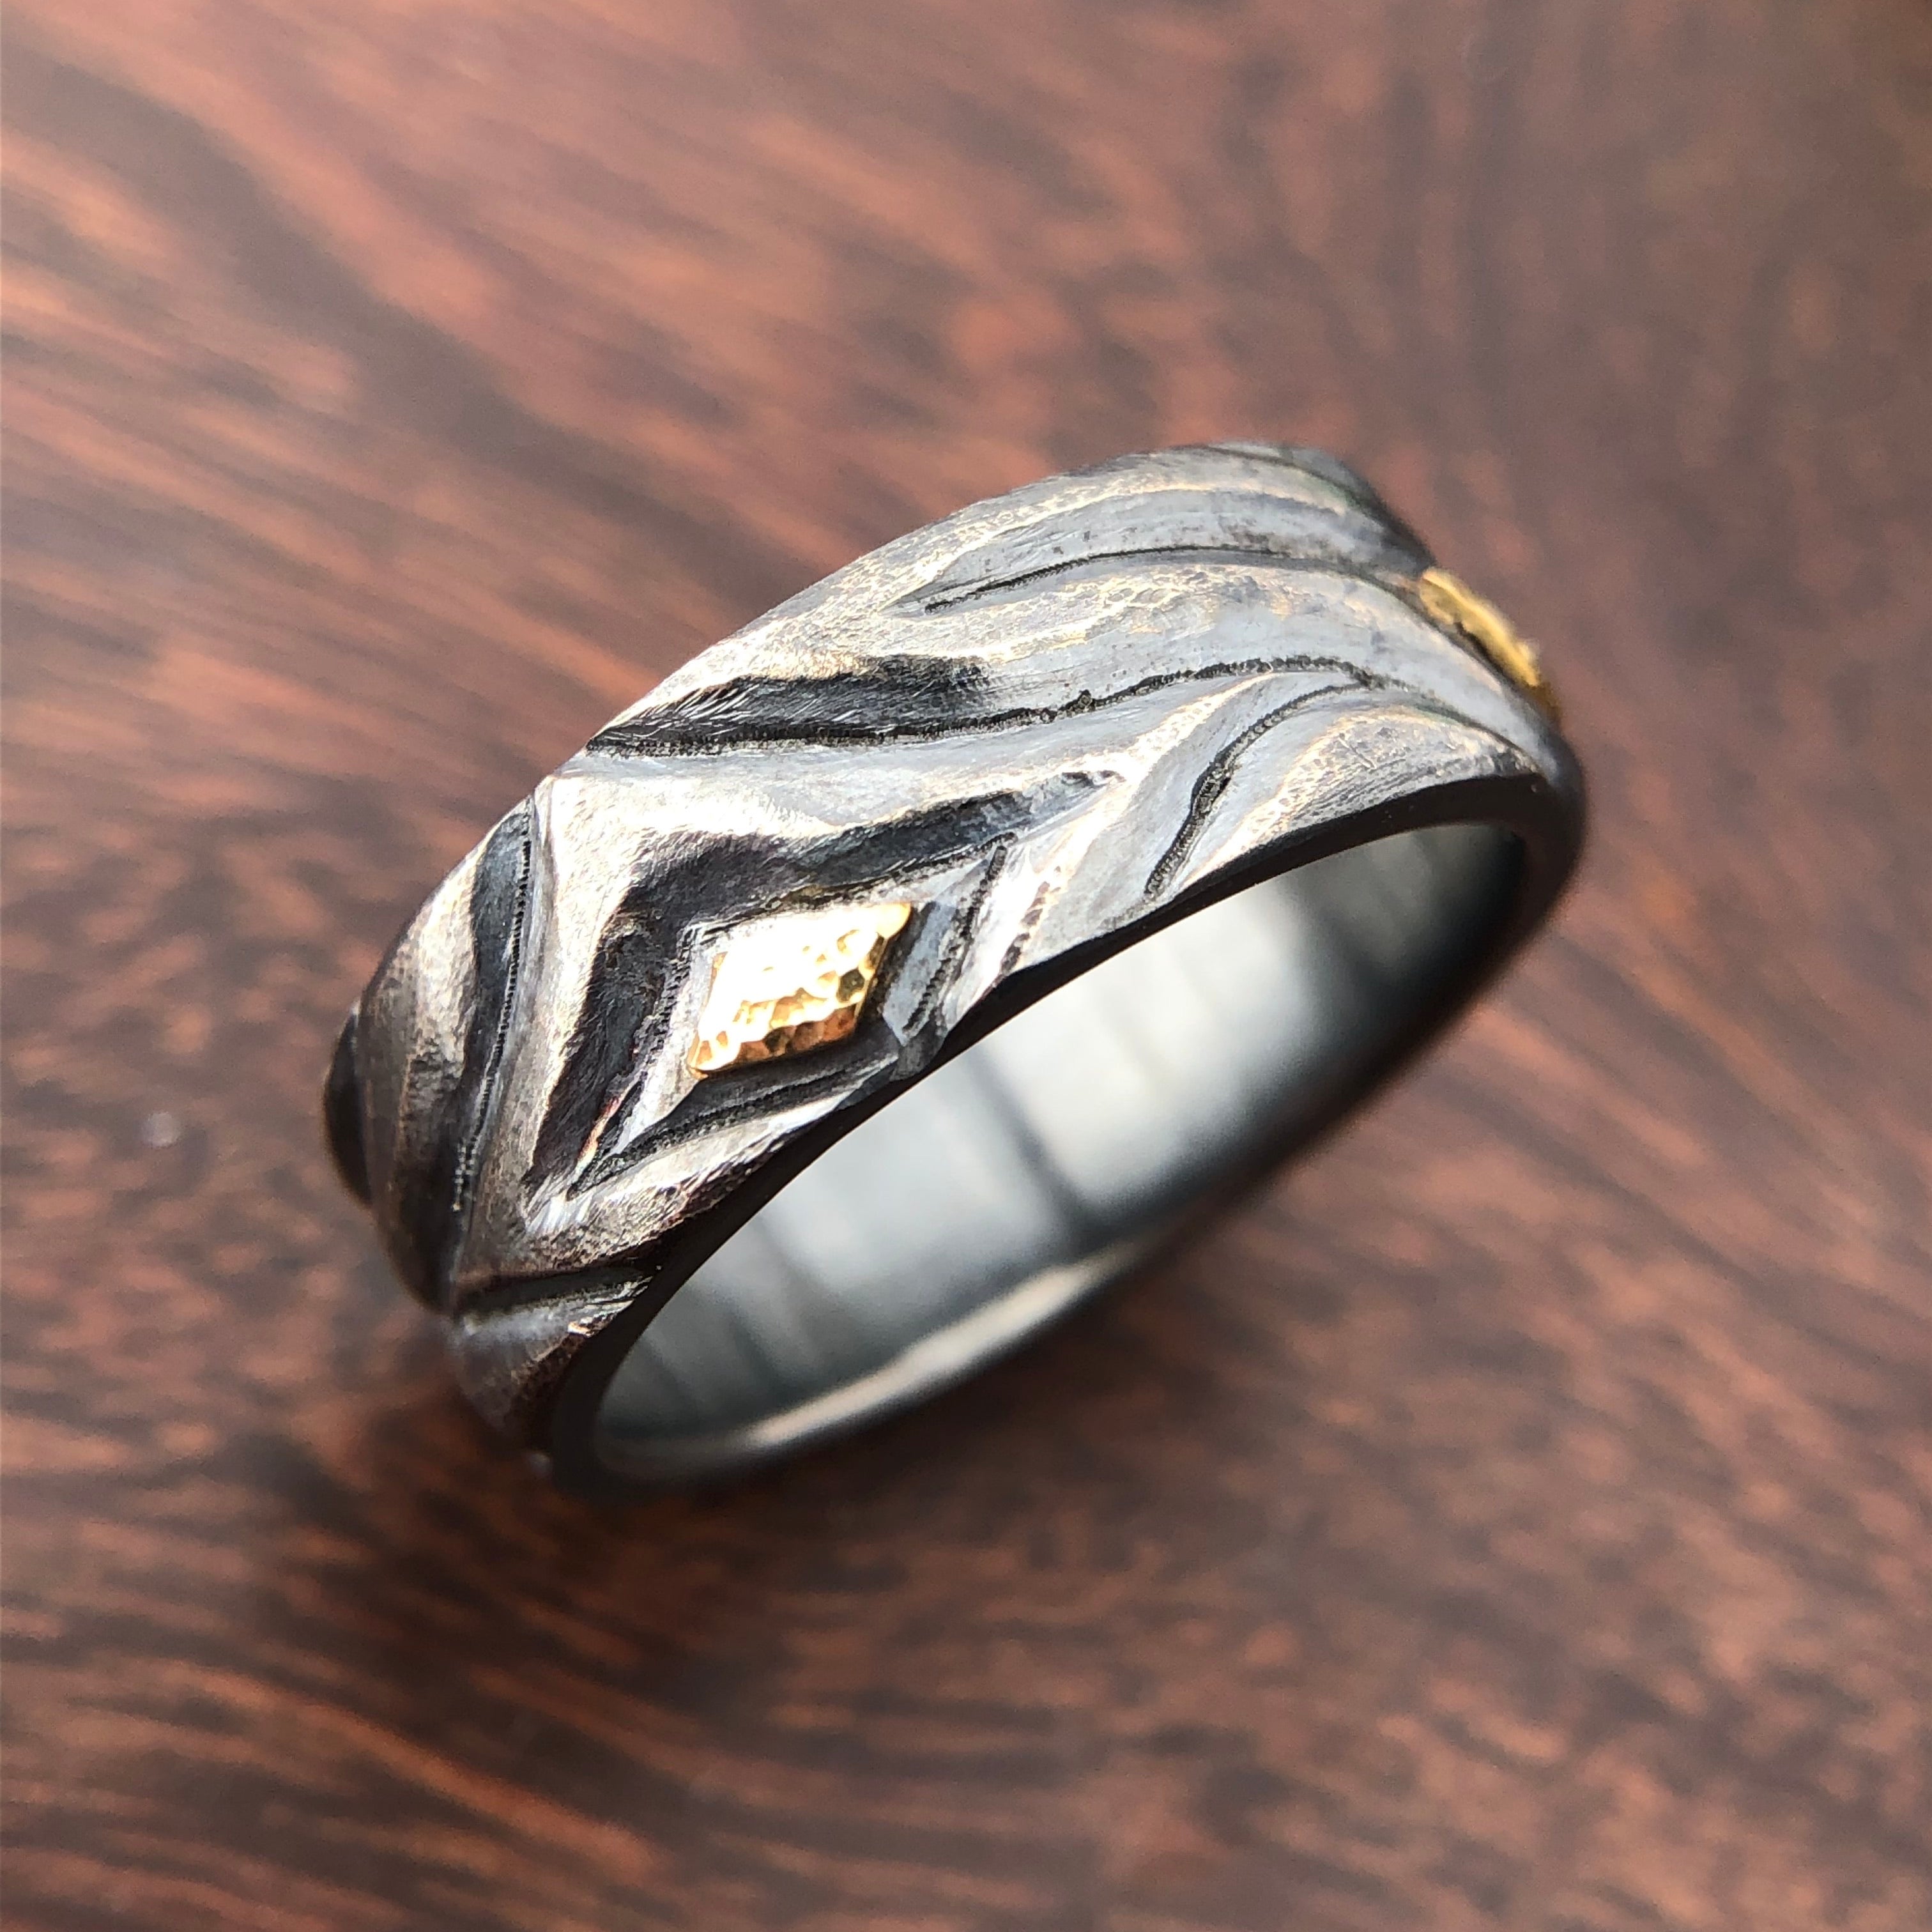 Organic sterling and 18k ring